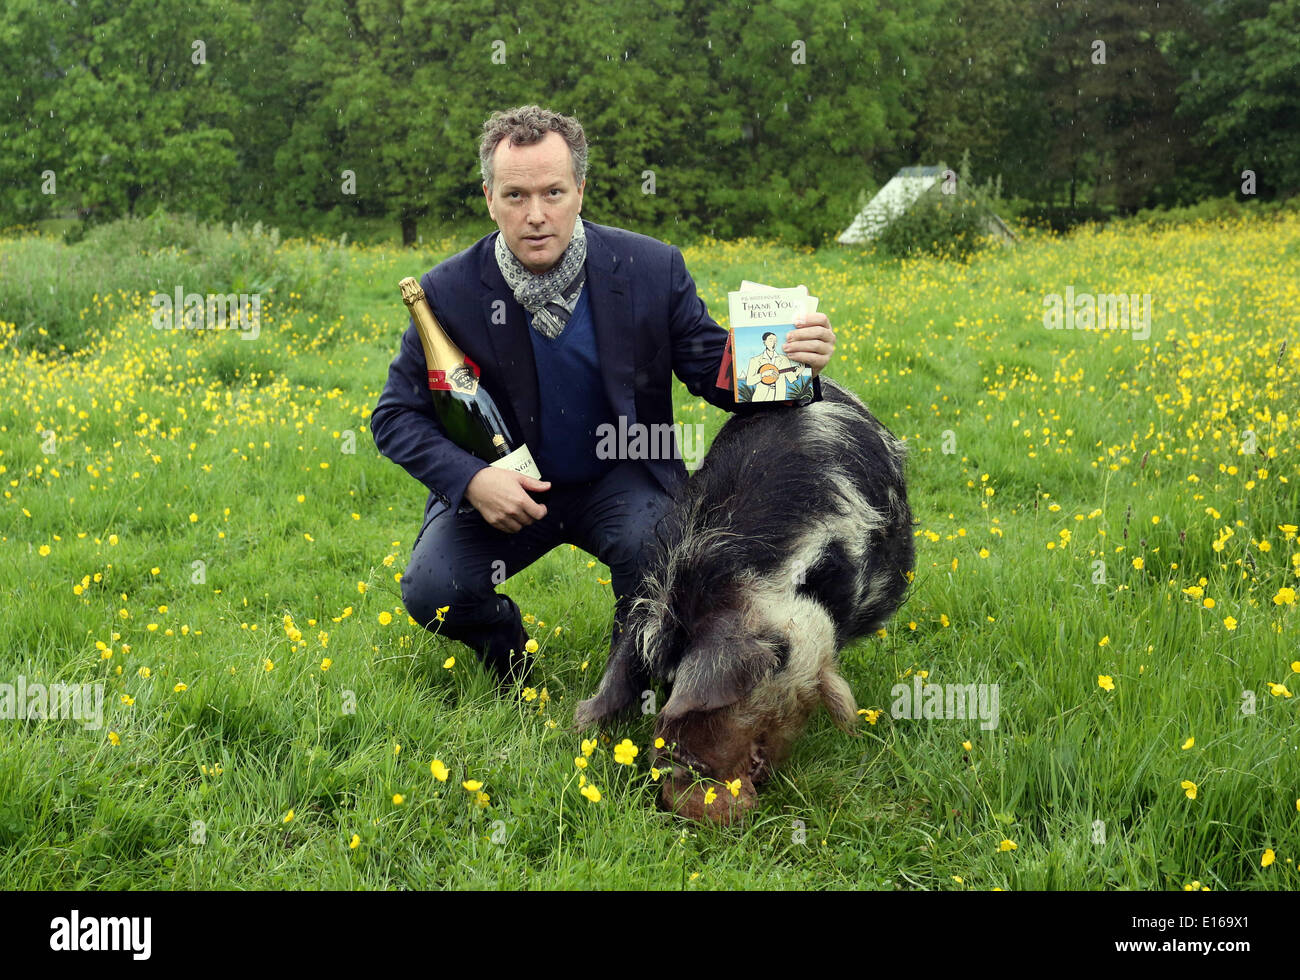 Hay on Wye, Wales, UK. 24th May, 2014.   Pictured: Edward St Aubyn who has won the 15th Bollinger Everyman Wodehouse Prize for Comic Fiction, with his novel Lost For Words, a satire on literary prizes.  Re: The Telegraph Hay Festival, Hay on Wye, Powys, Wales UK. Stock Photo